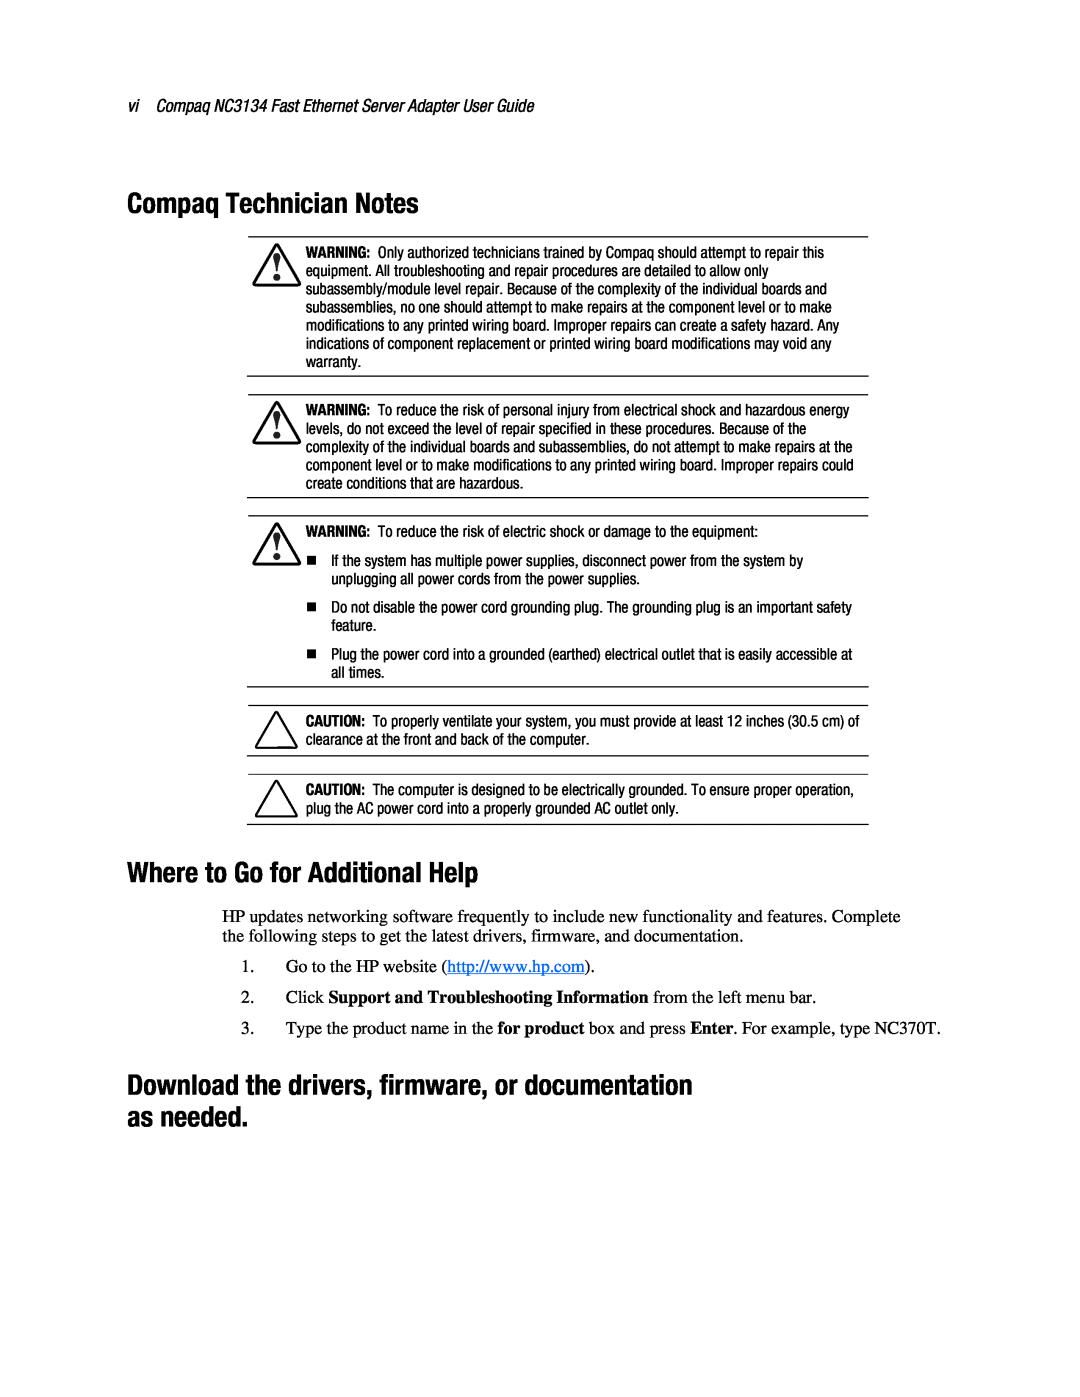 Compaq 3134 manual Compaq Technician Notes, Where to Go for Additional Help 